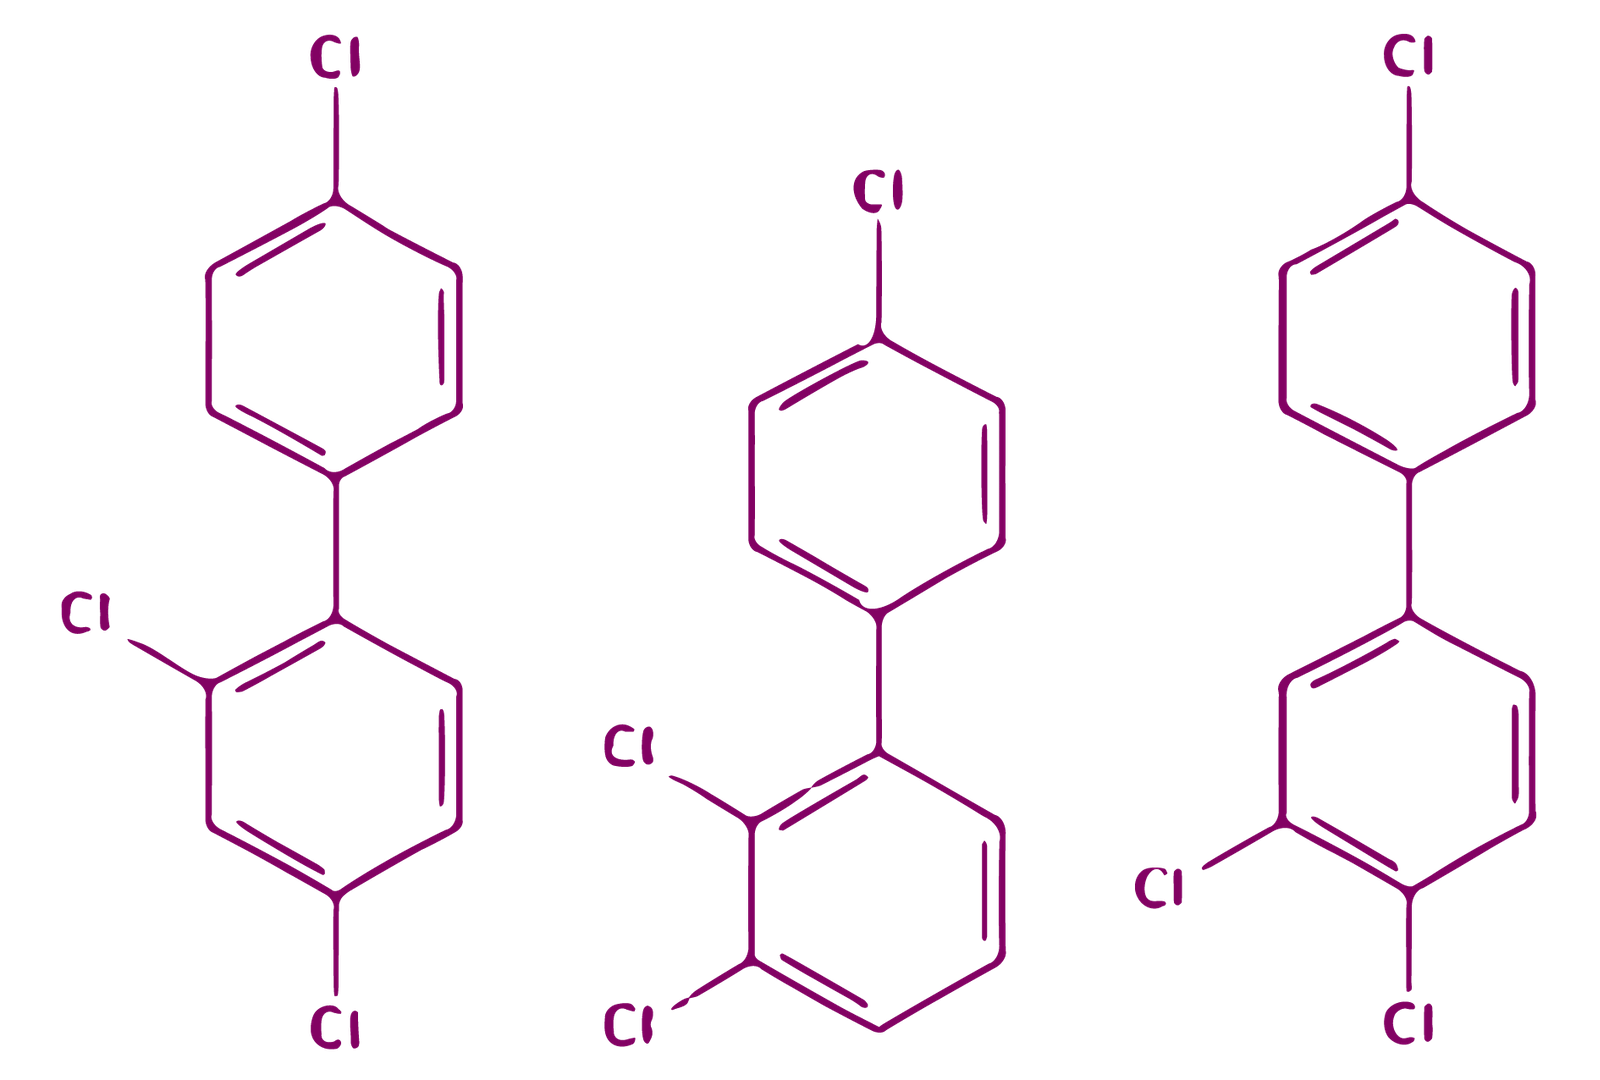 Sketch showing the molecular structure of three PCB molecules, each containing three chlorine atoms.  